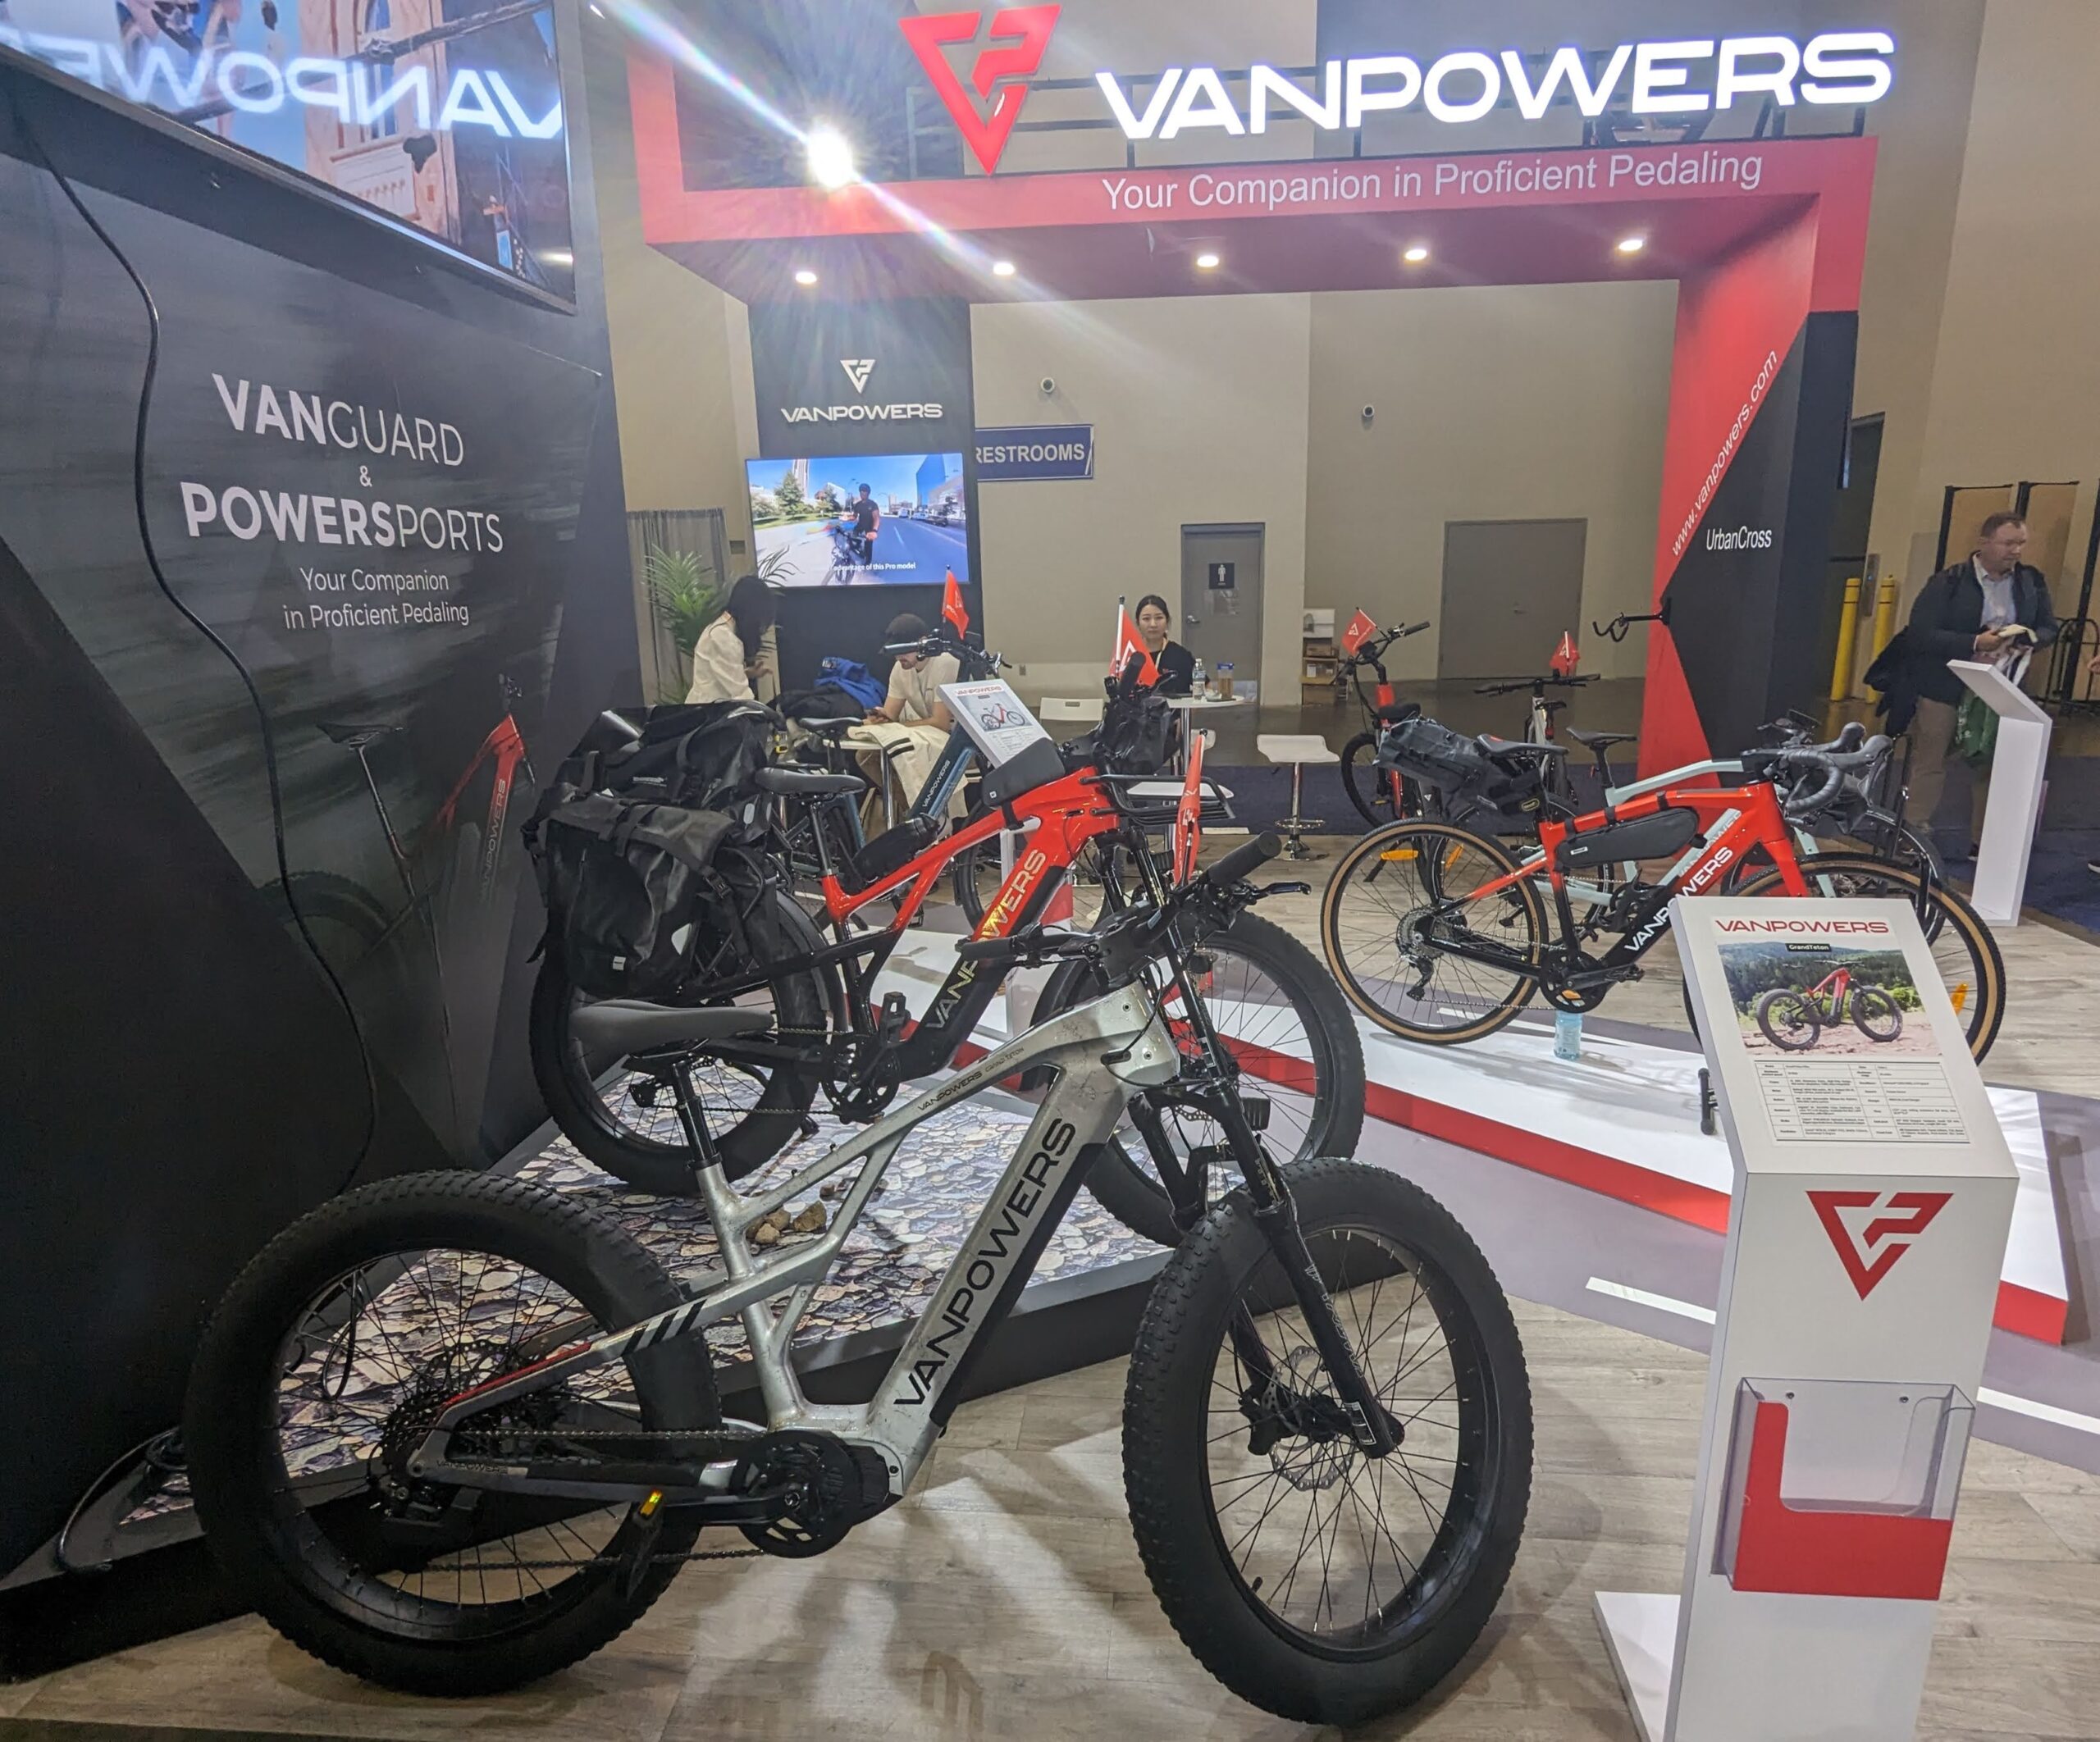 Vanpowers unveiled its latest smart e-bikes at CES